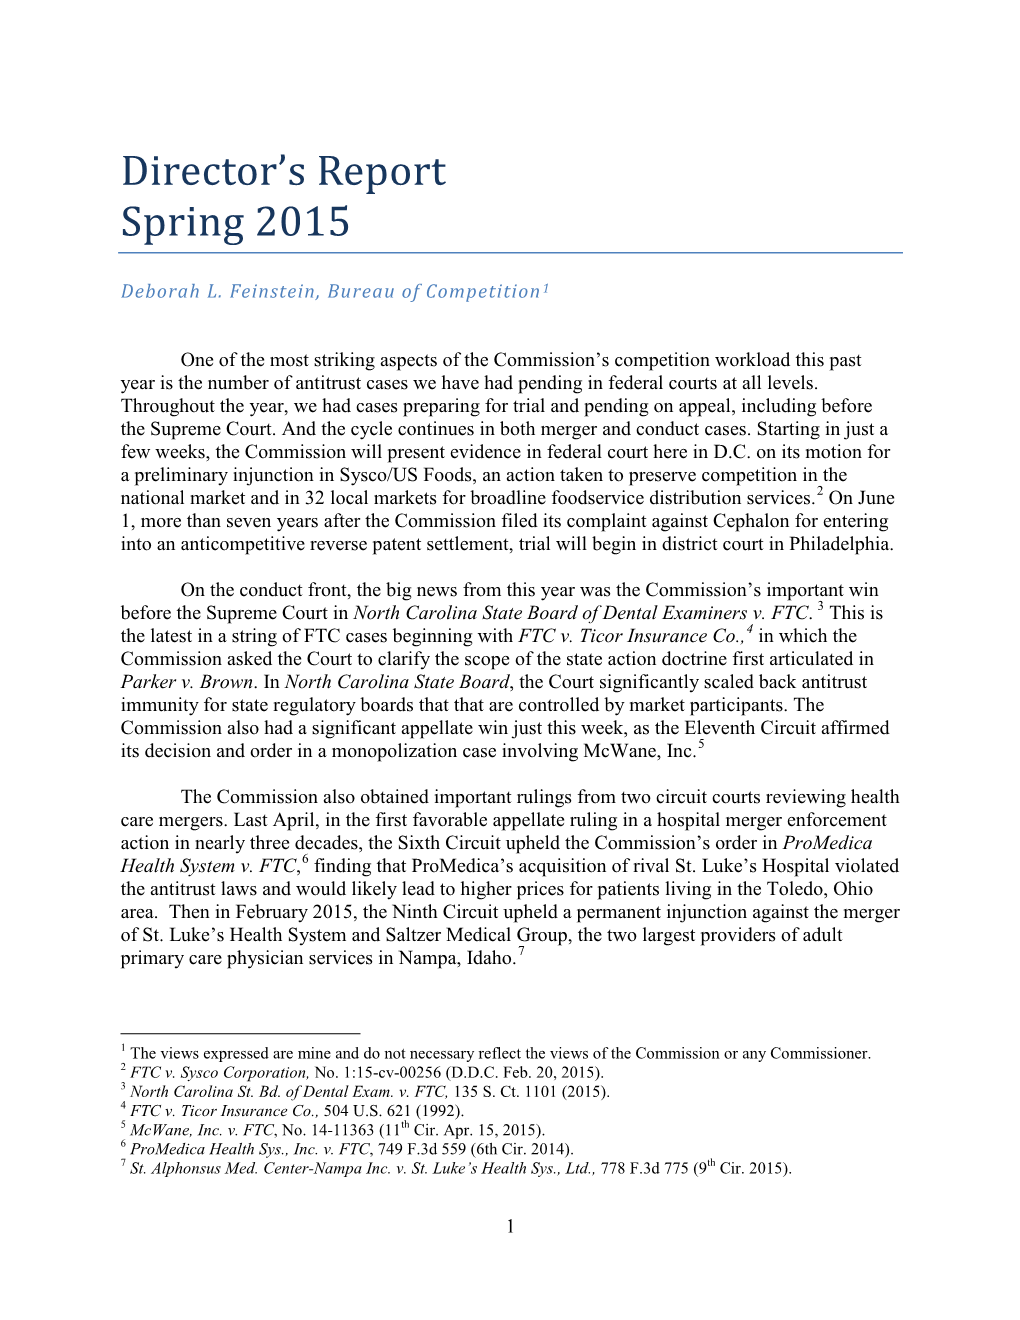 BC Director's Report Spring 2015